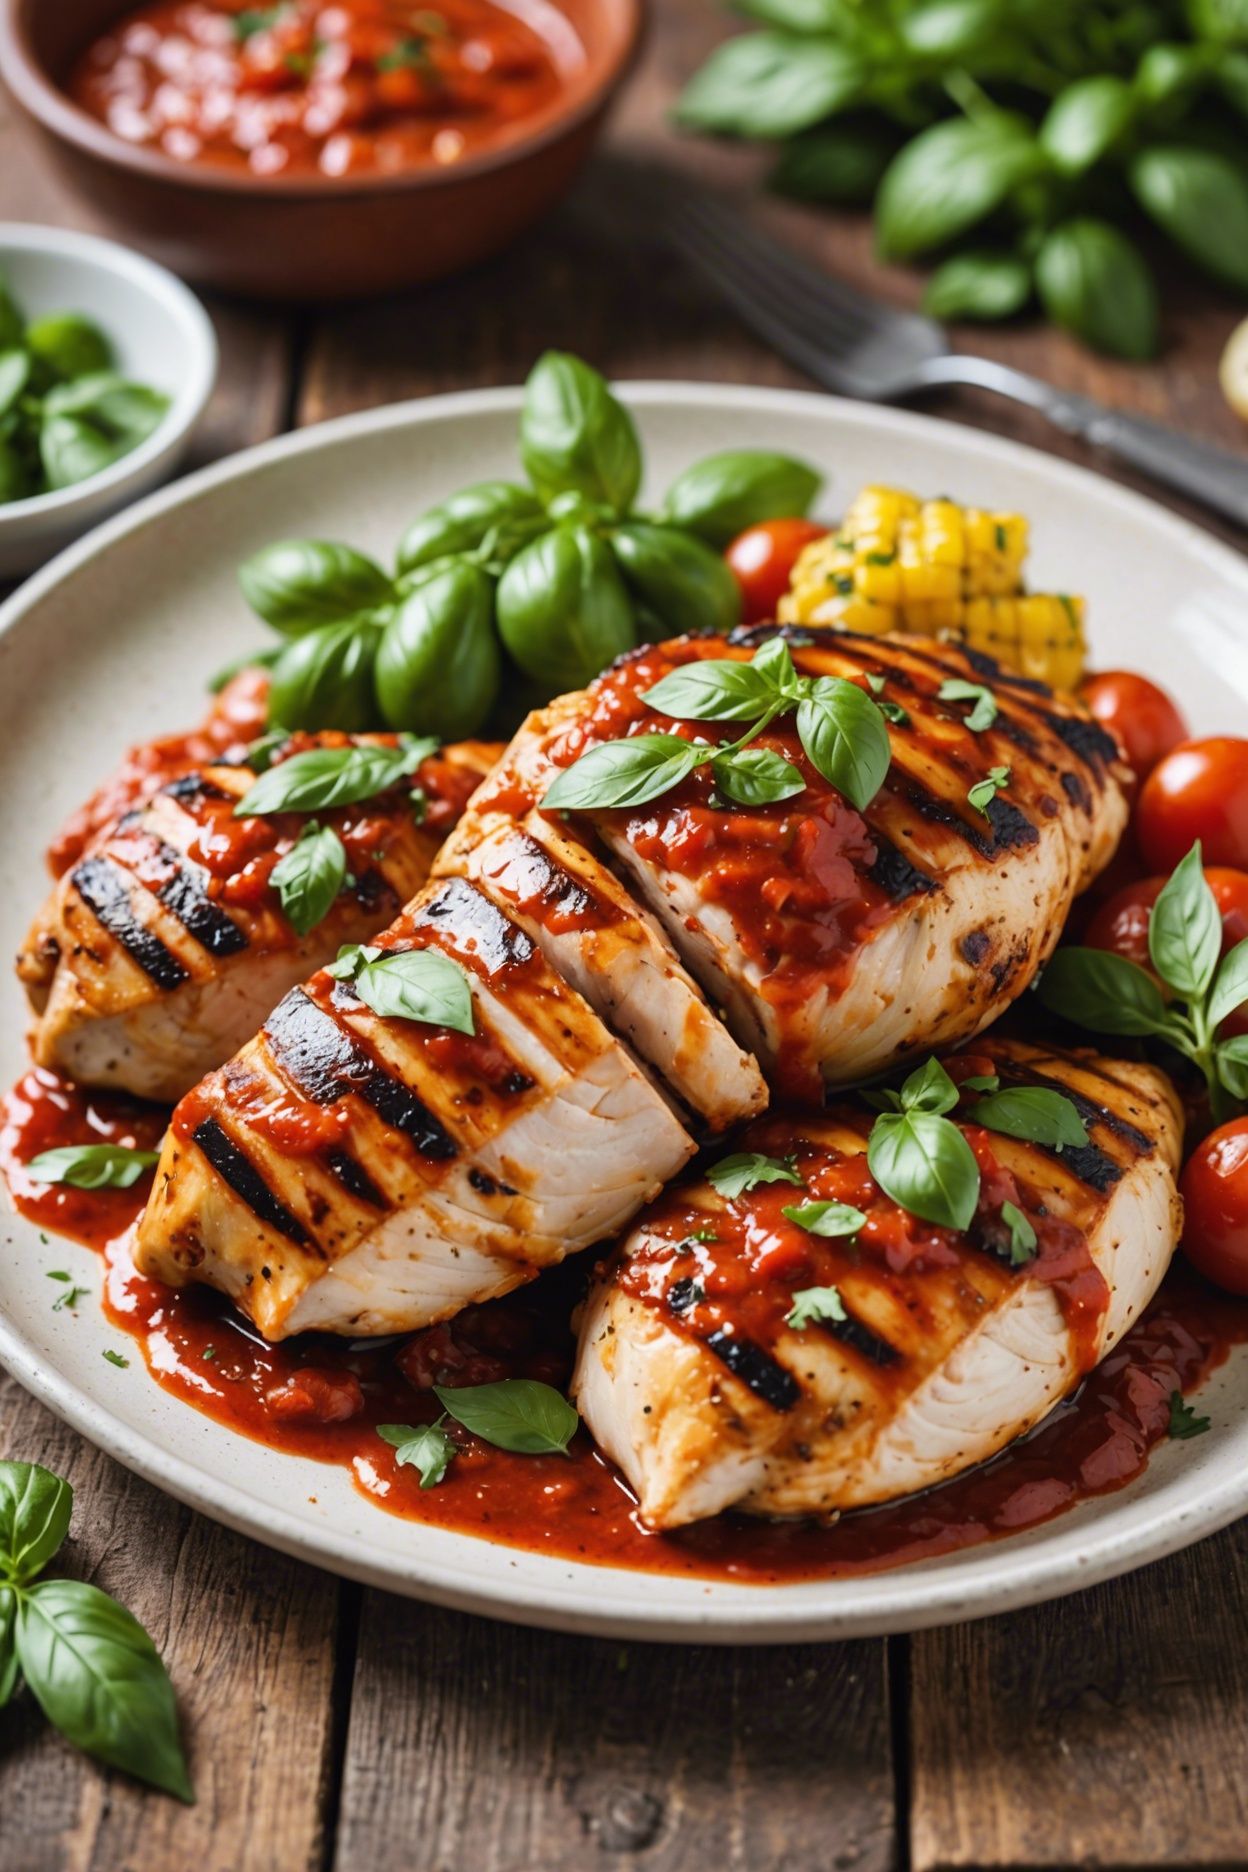 Grilled Chicken Tarragon With Tomato Sauce